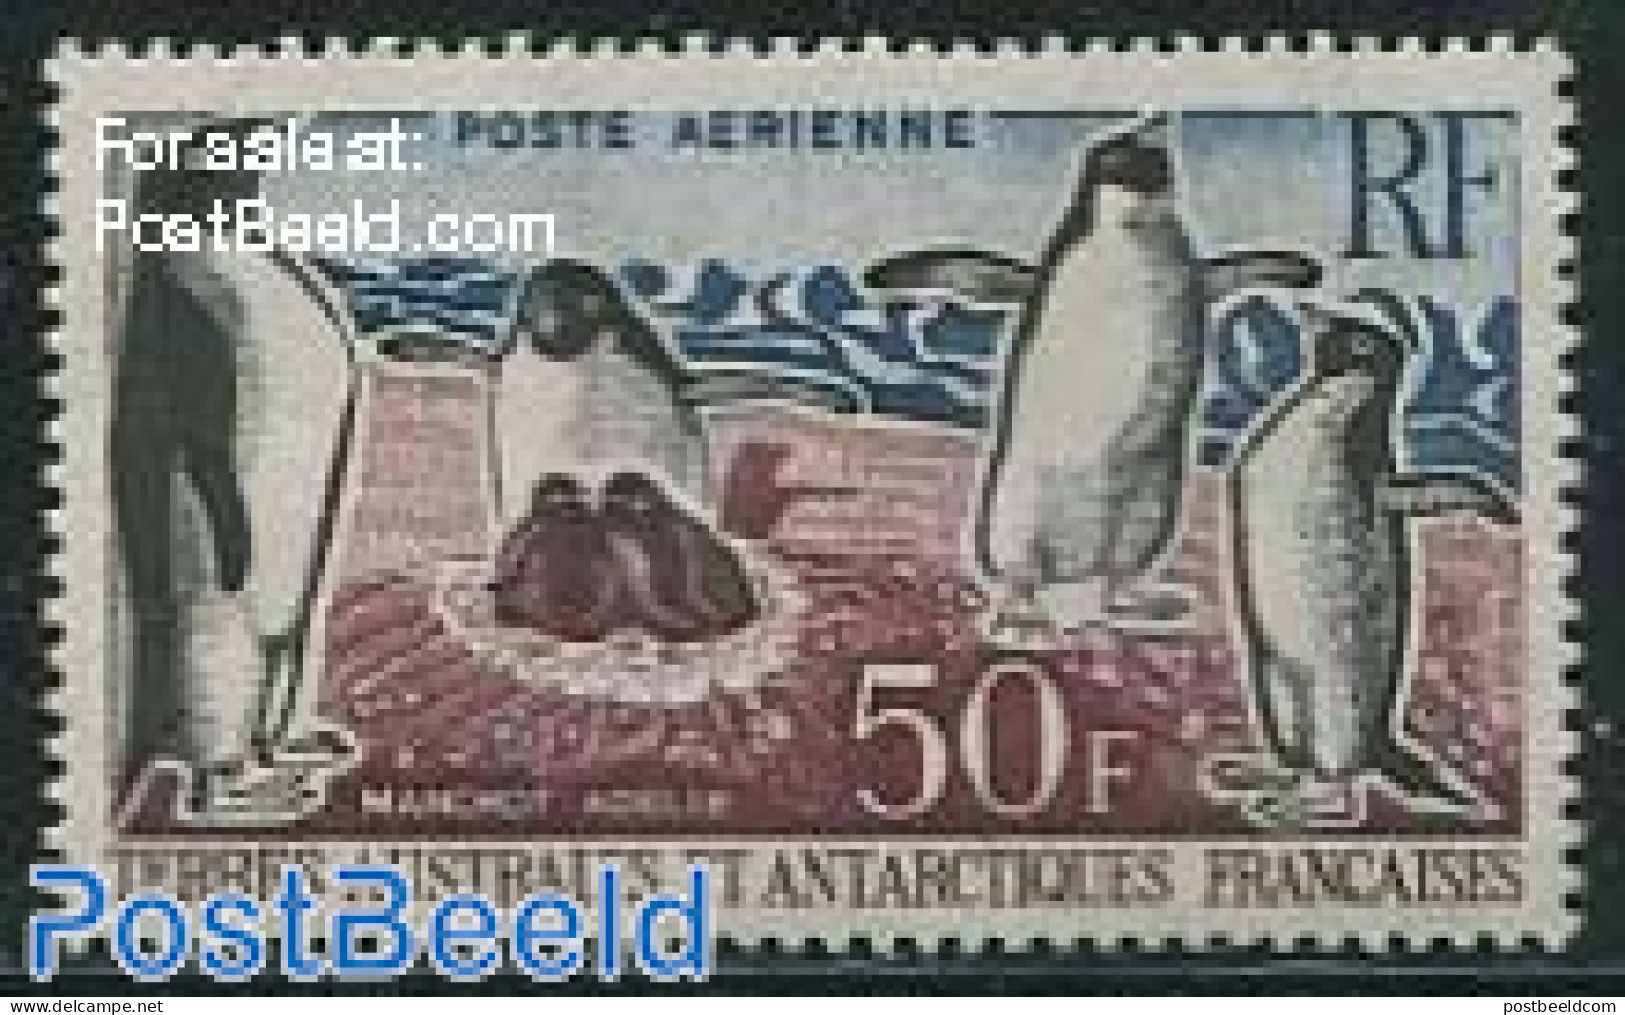 French Antarctic Territory 1962 Penguin 1v, Unused (hinged), Nature - Science - Birds - Penguins - The Arctic & Antarc.. - Unused Stamps